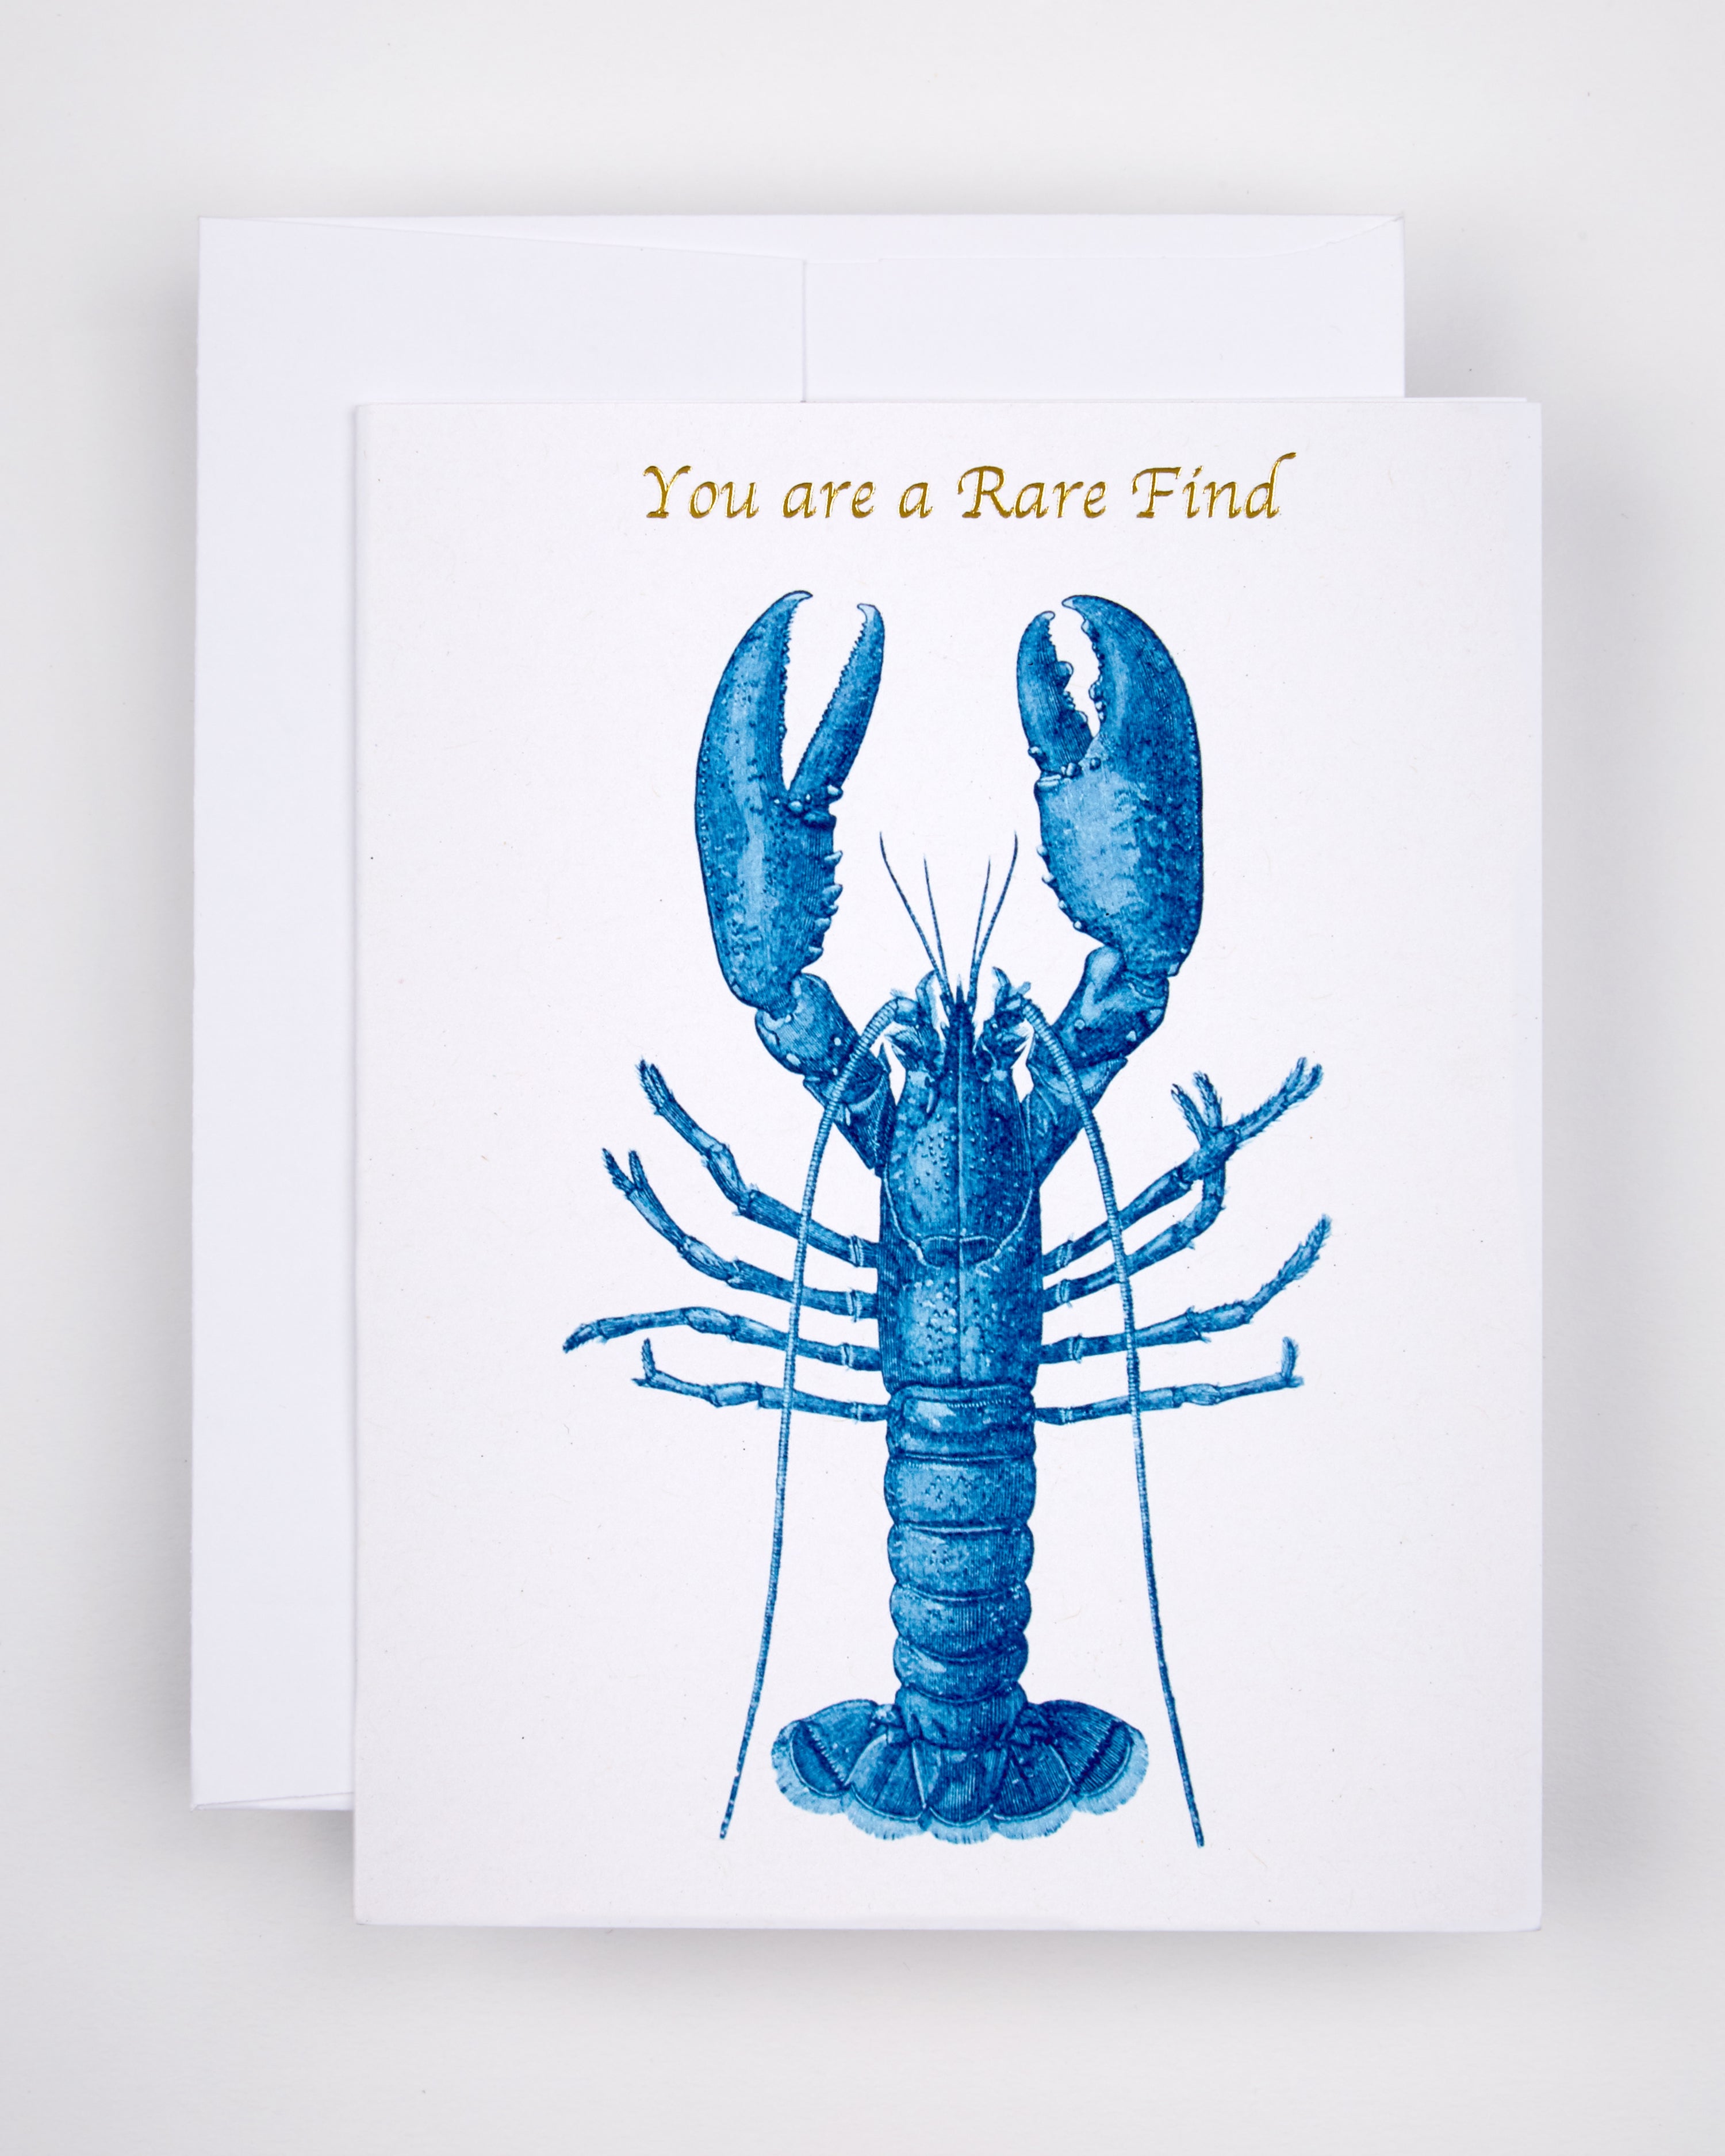 Greeting card with the text You are a Rare Find over a blue lobster